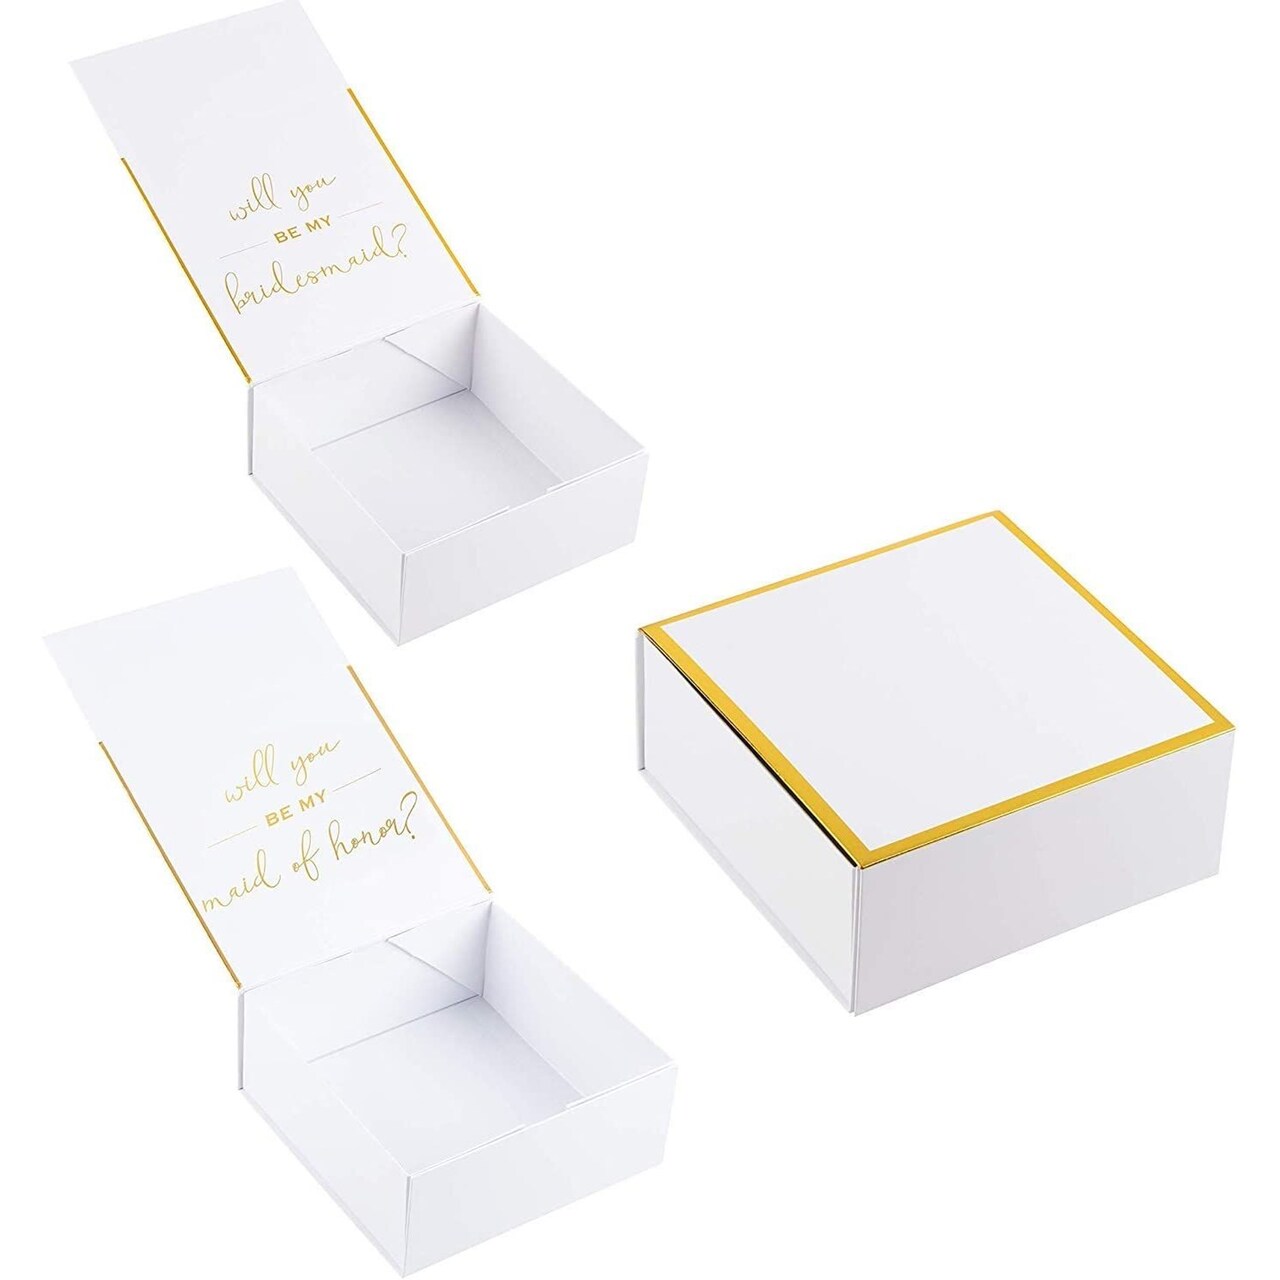 Will You Be My Bridesmaid Proposal Gift Boxes, 2 Bridesmaid and 1 Maid of Honor Empty Box for Wedding Presents, White with Gold Foil Text, 8 x 8 x 3.6 inches